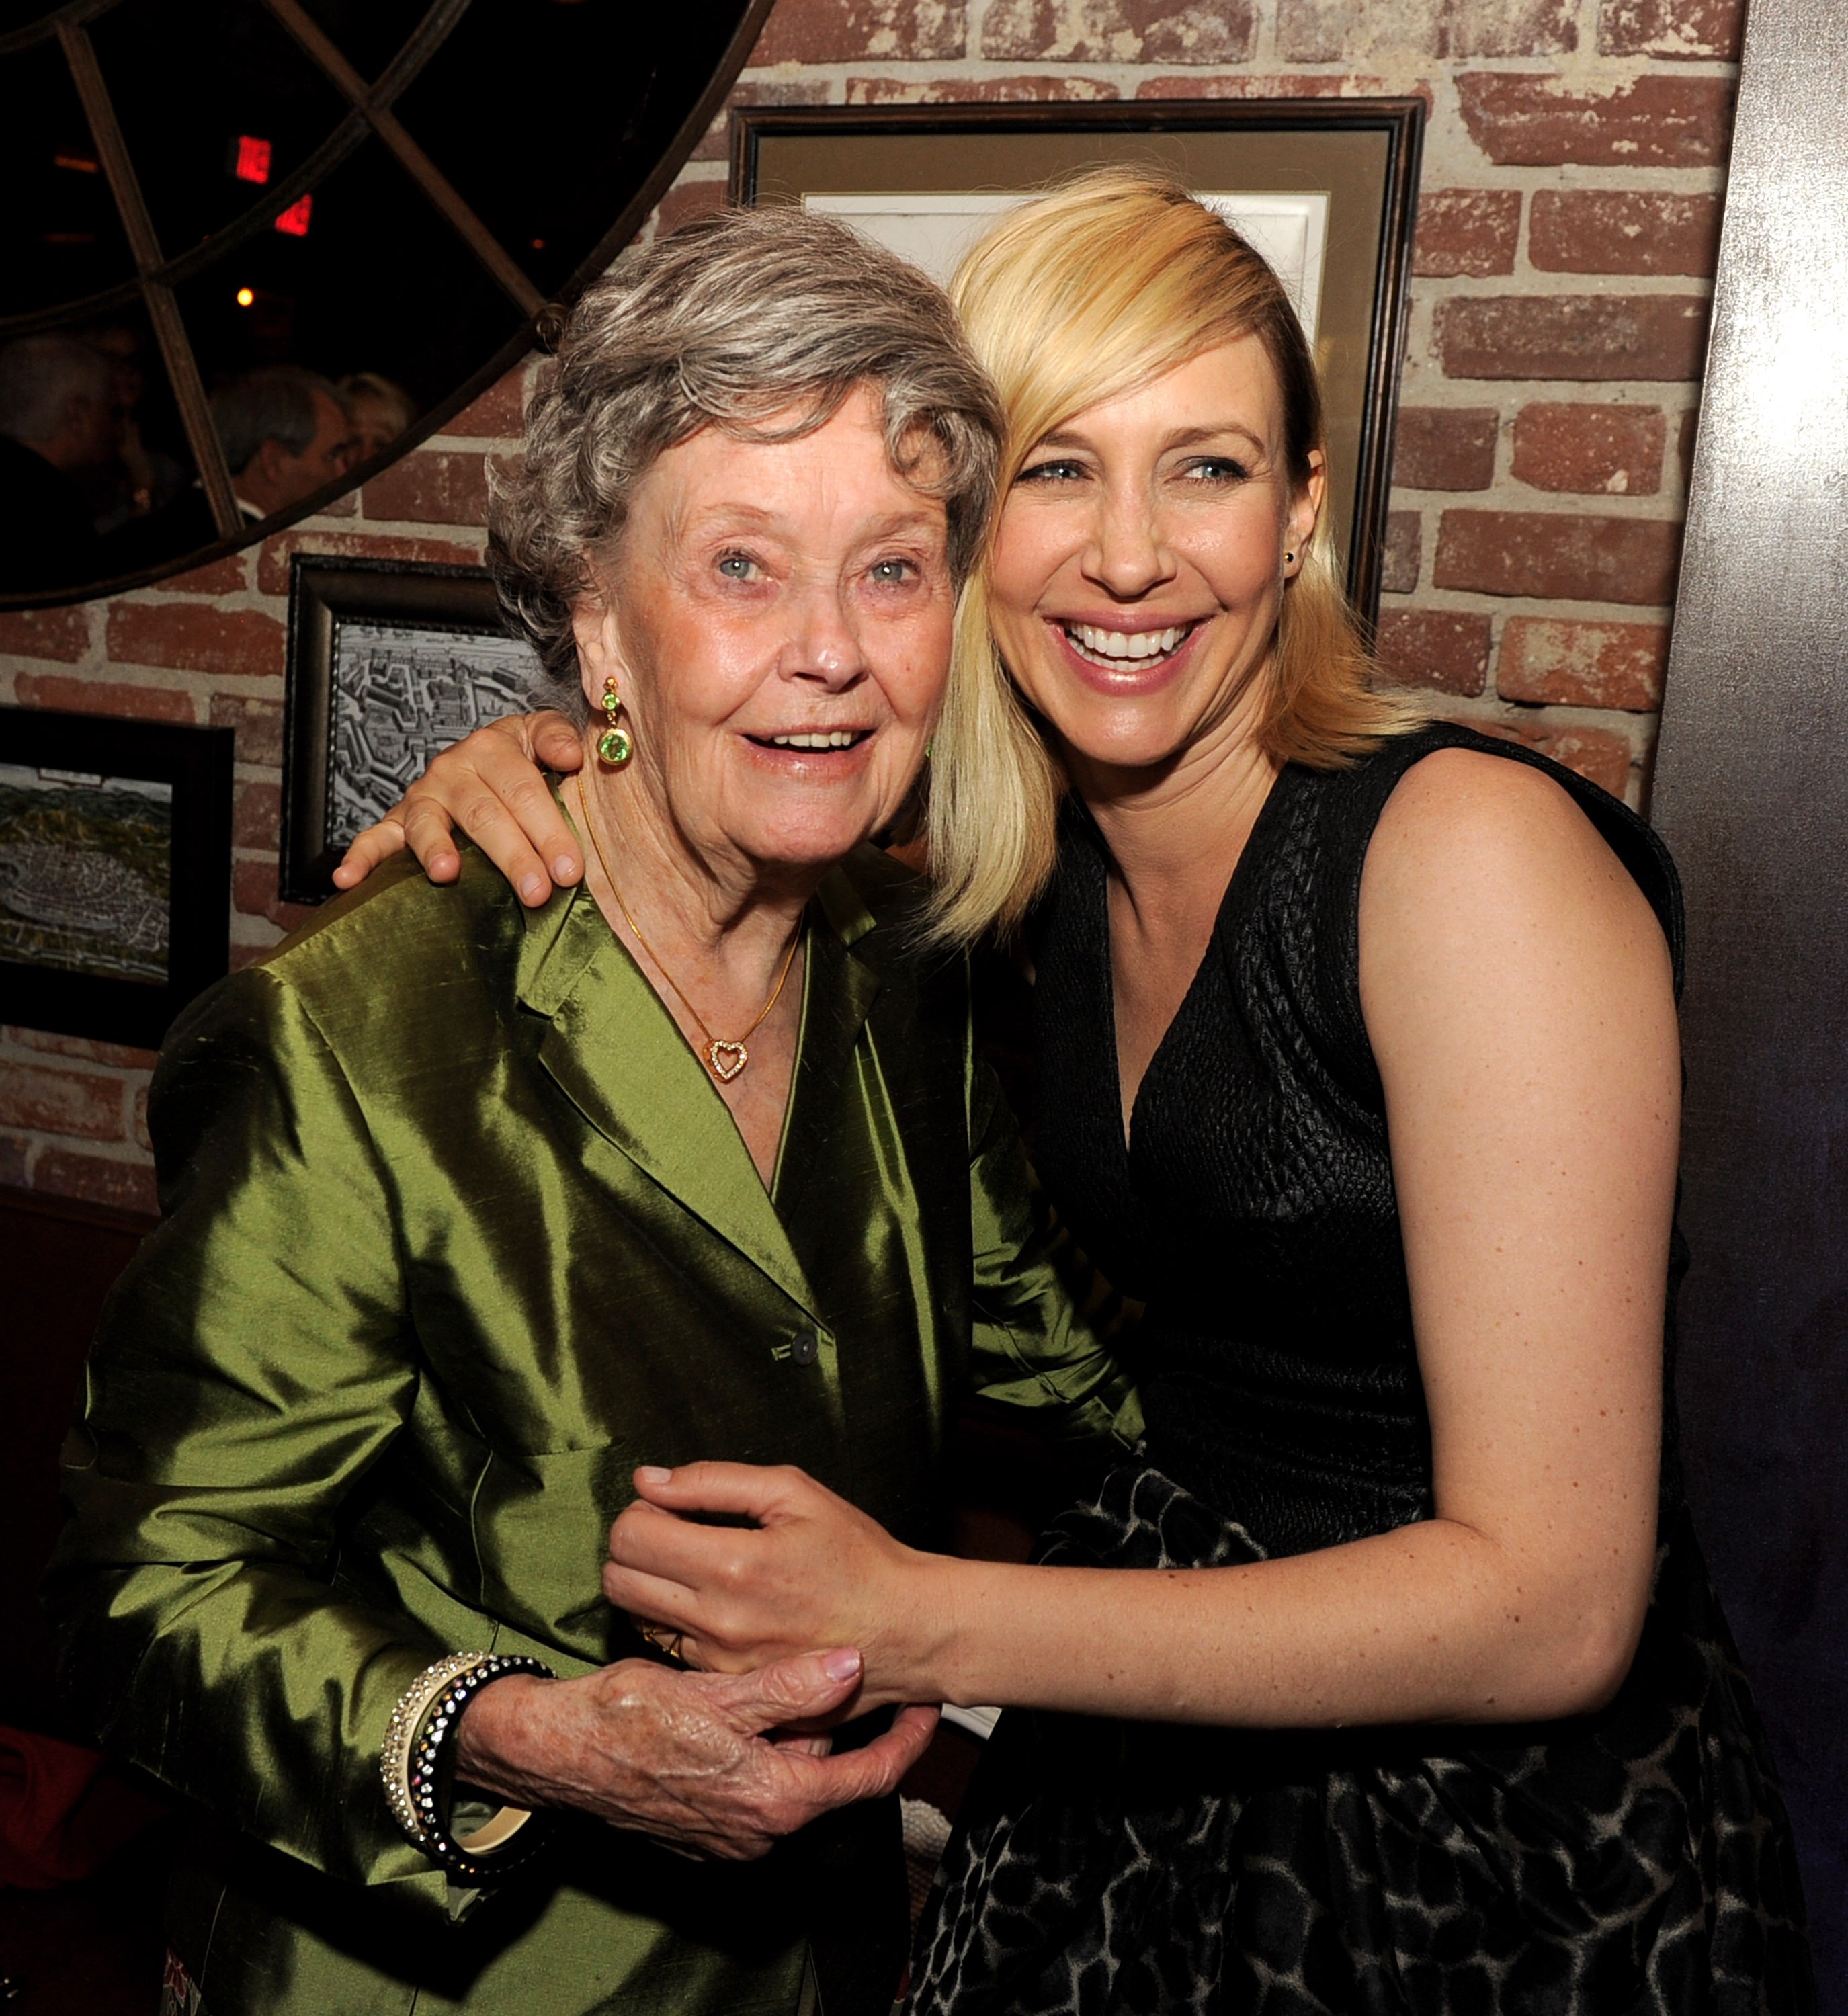 Lorraine Warren and Vera Farmiga at the Premier of "The Conjuring" in 2013 | Photo: Getty Images